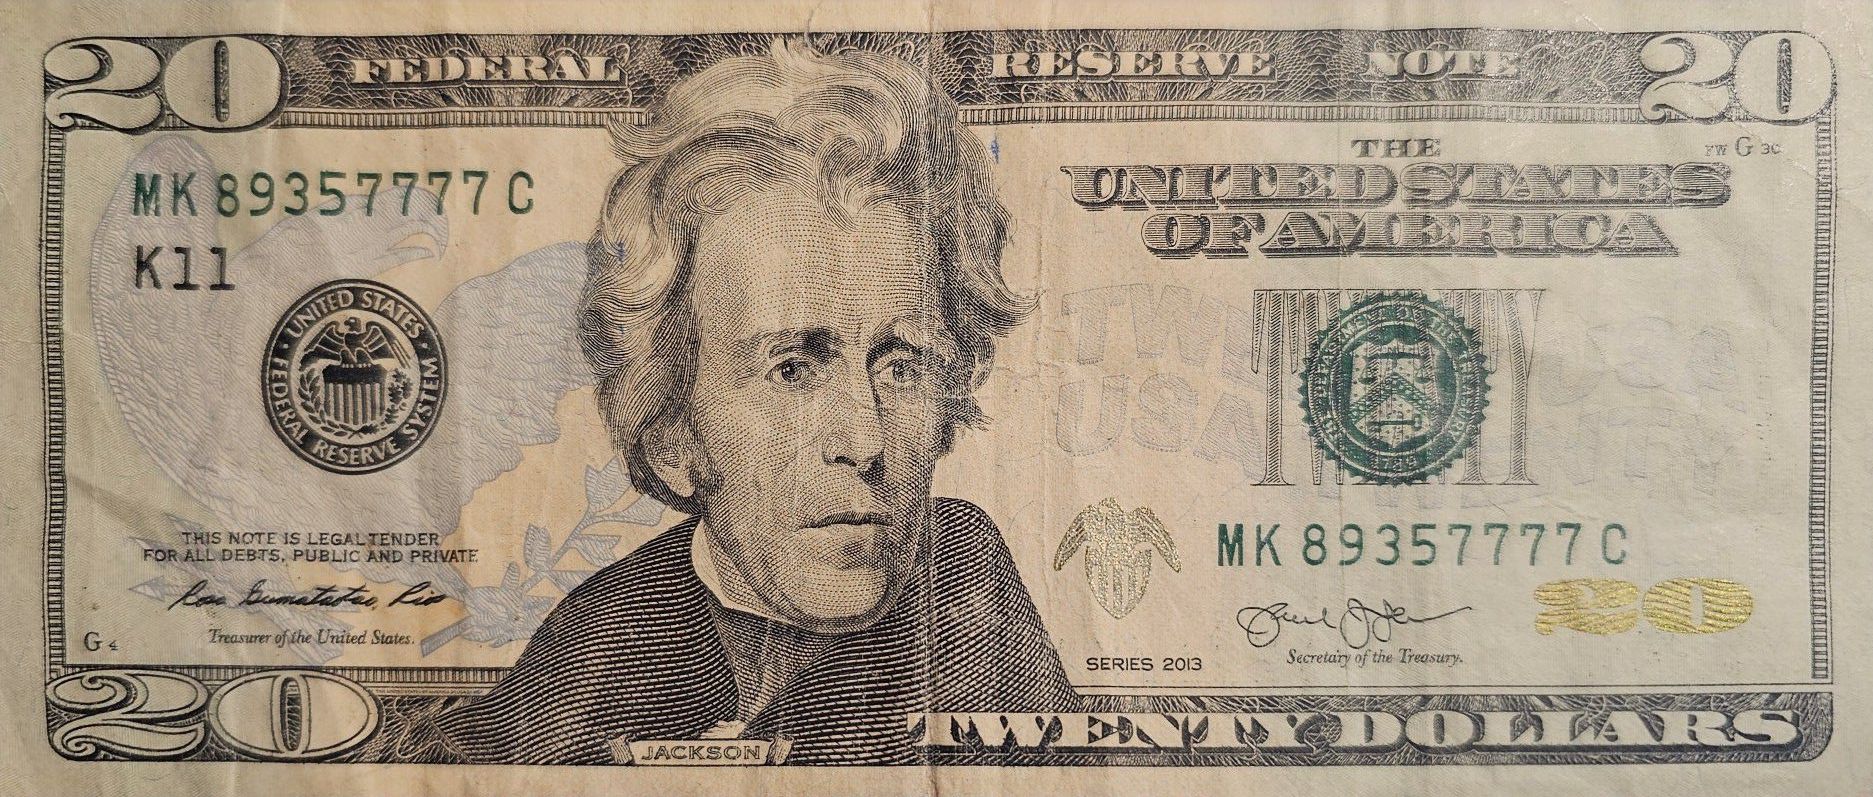 Fancy serial number (contact info removed)7, 2013, 20 dollar bill, solid quad of 7's. 